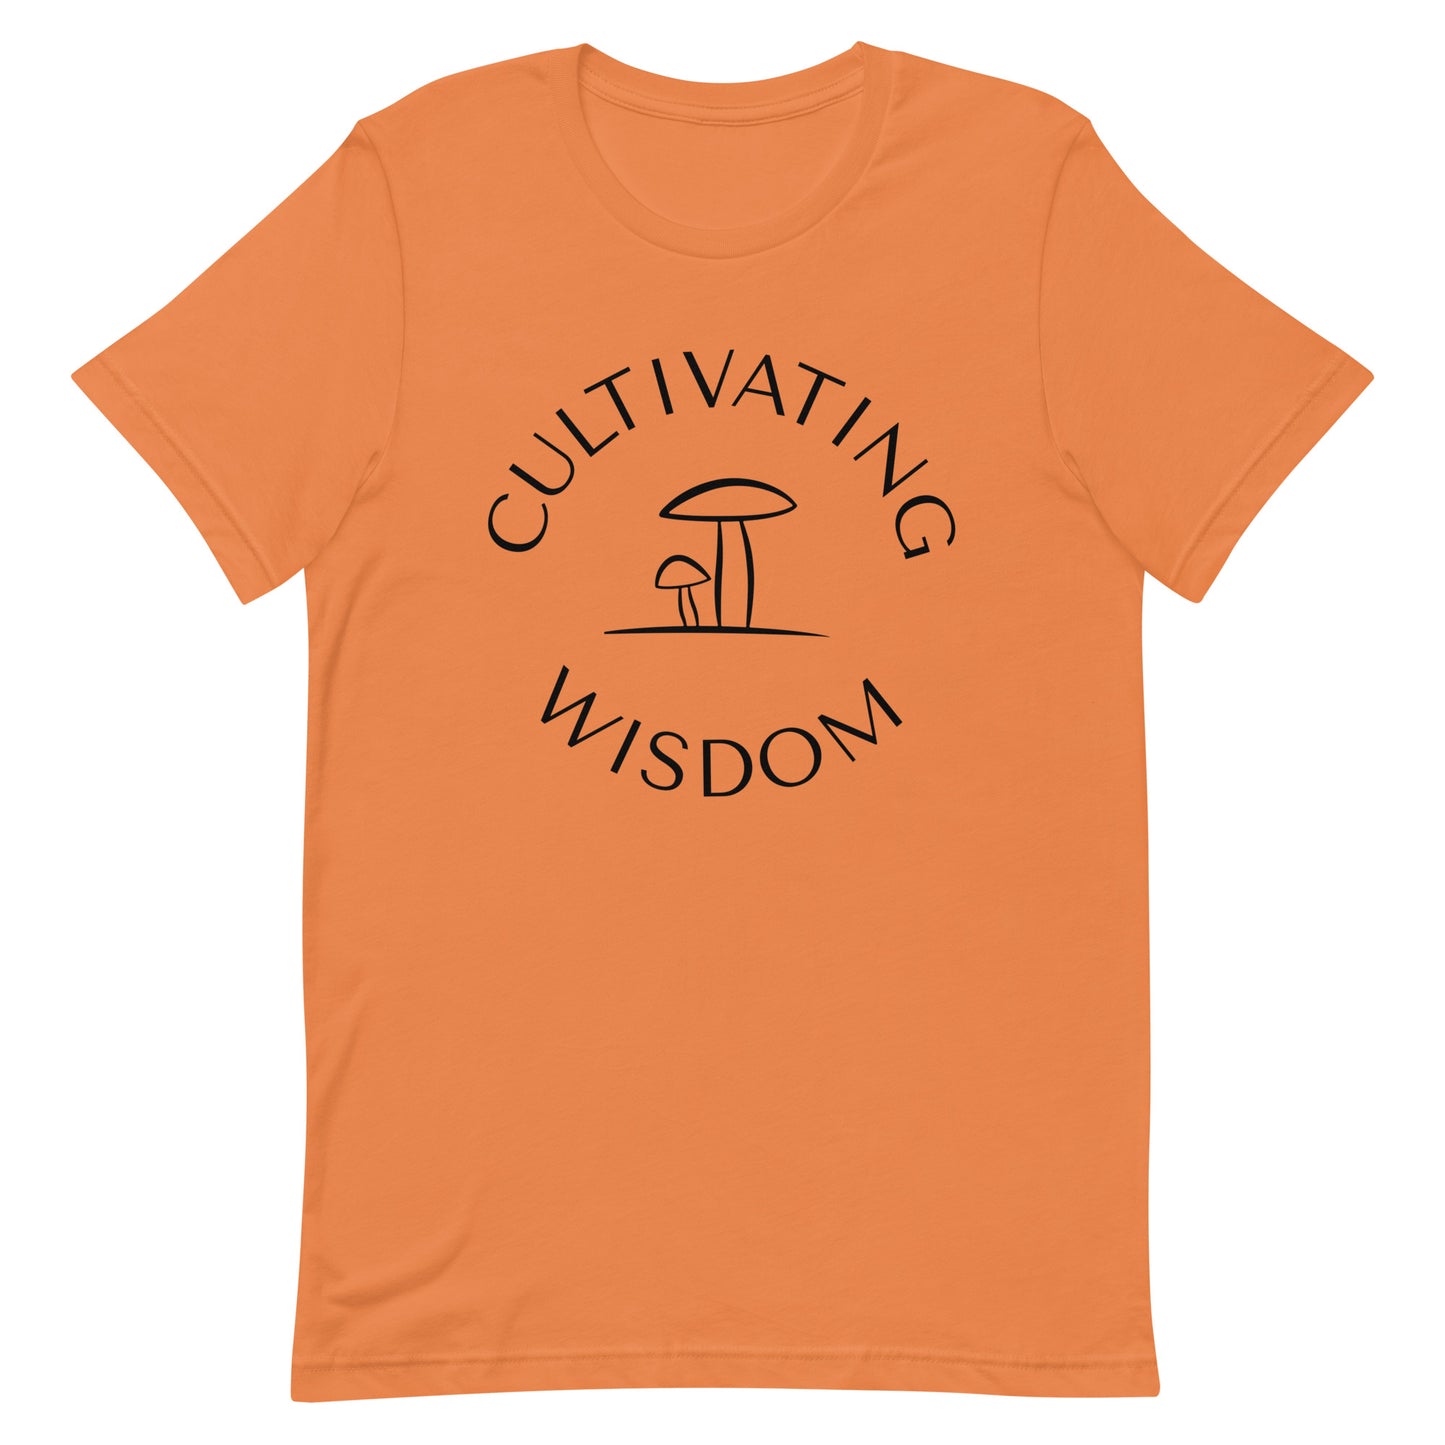 Cultivating Wisdom Earth Colors Unisex t-shirt